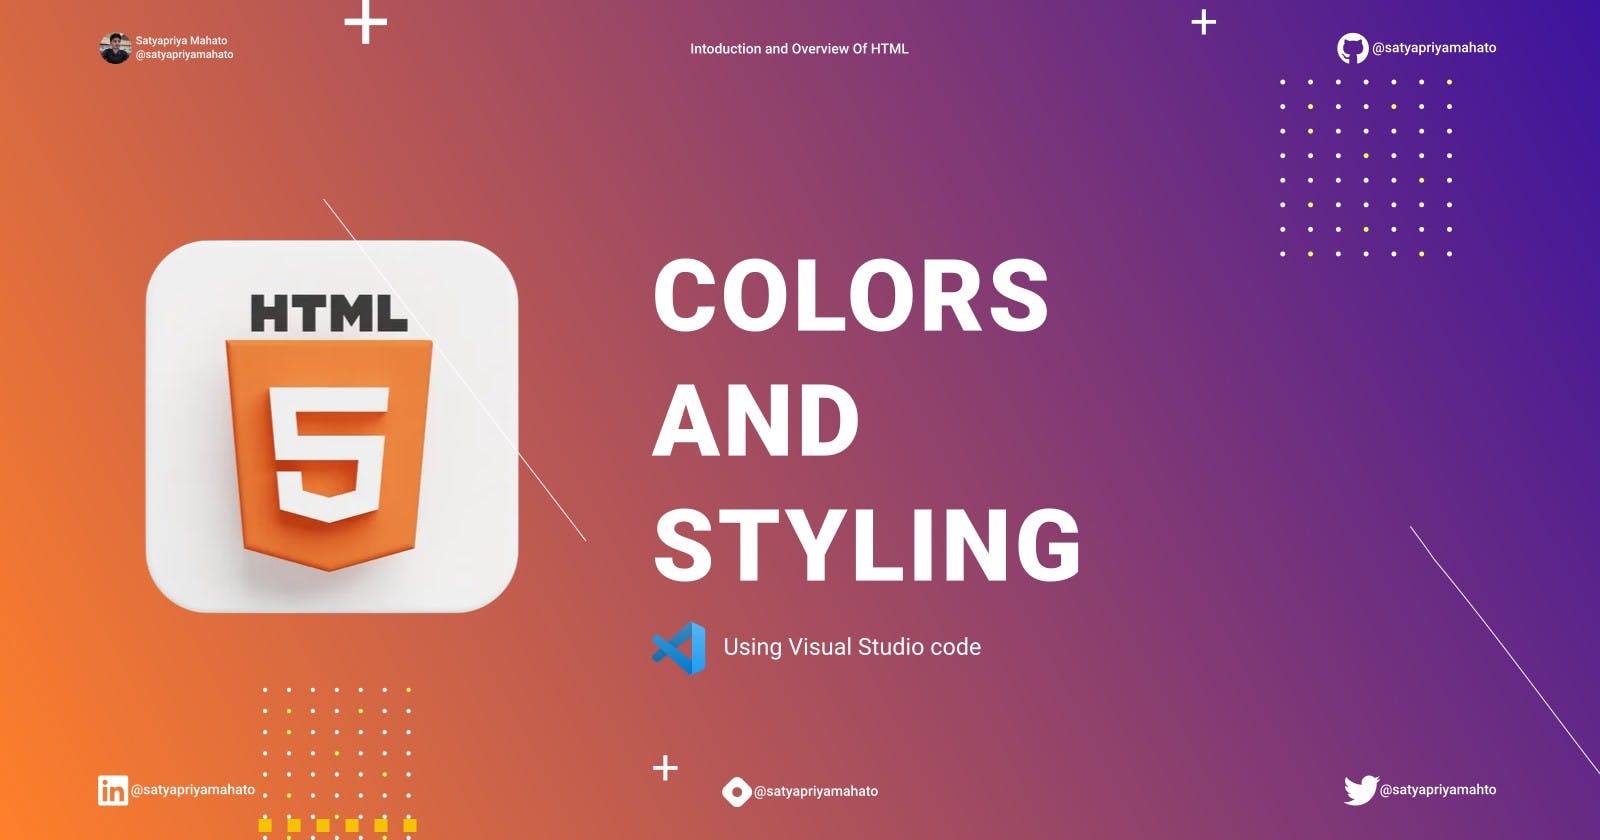 Colors and Styling in HTML